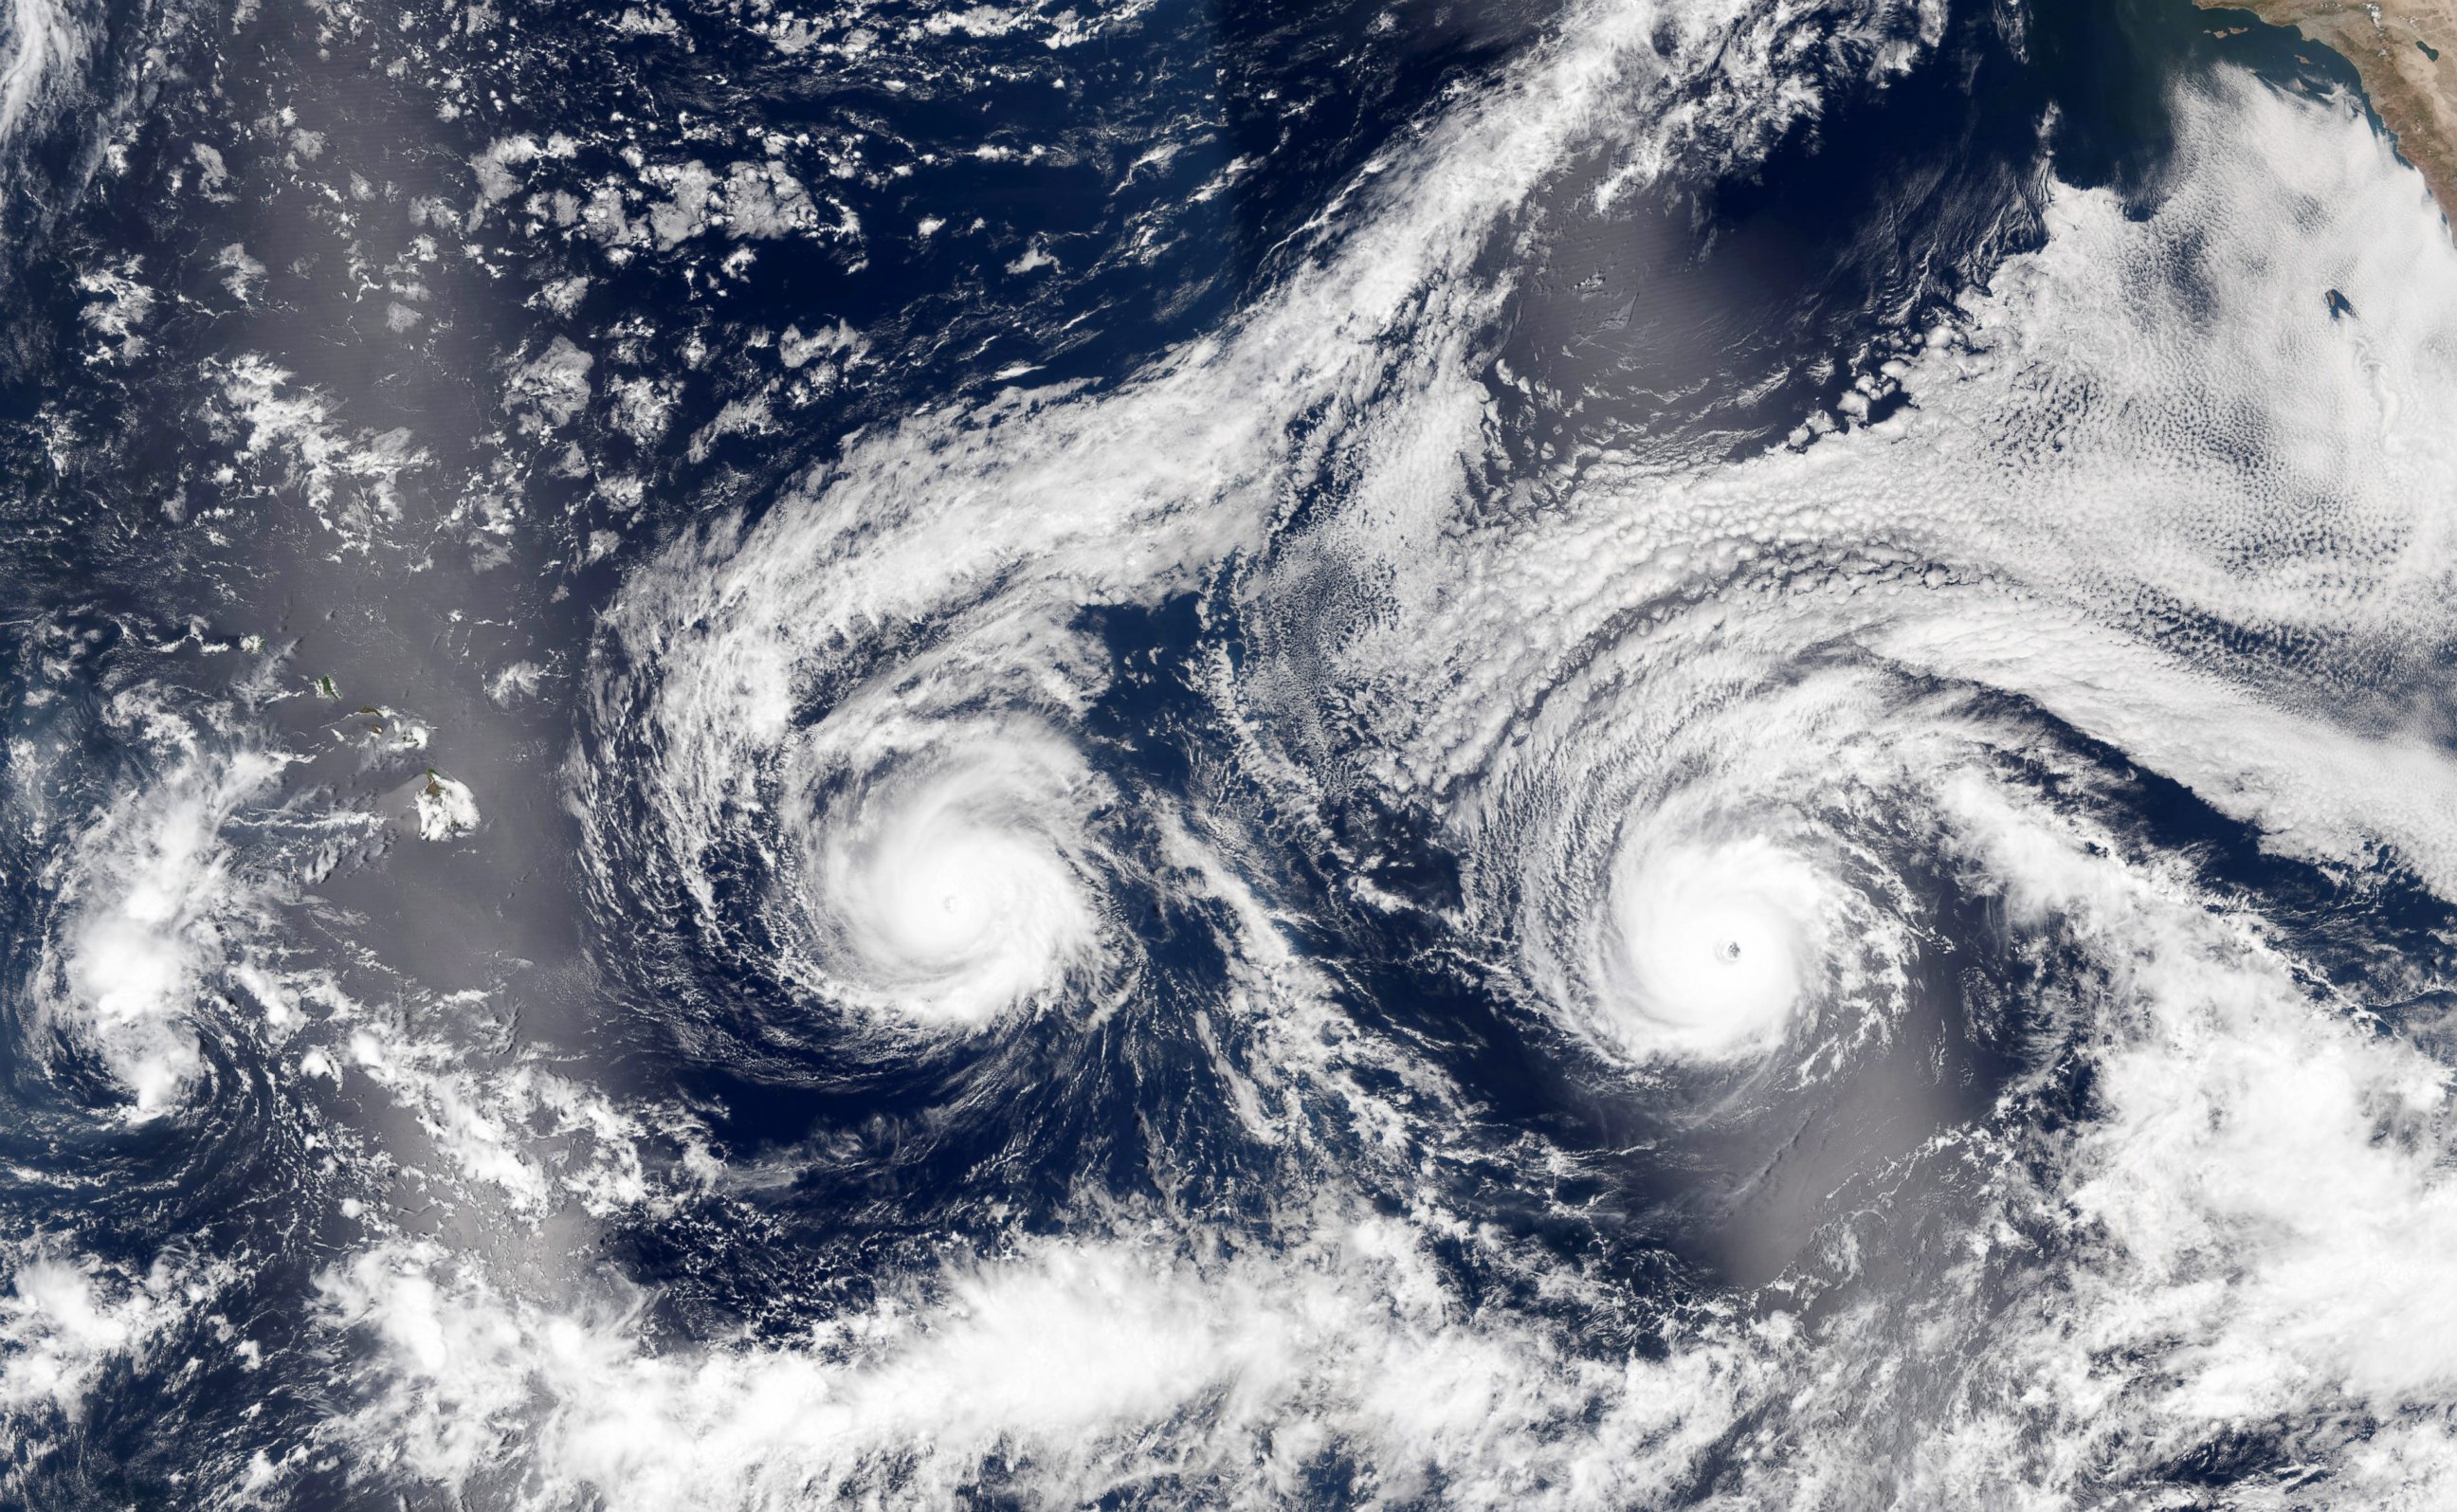 PHOTO: A handout image released by NASA Earth Observatory on Aug. 31, 2016 shows a satellite image of hurricanes Madeline (L) and Lester (R) over the Pacific Sea near Hawaii.